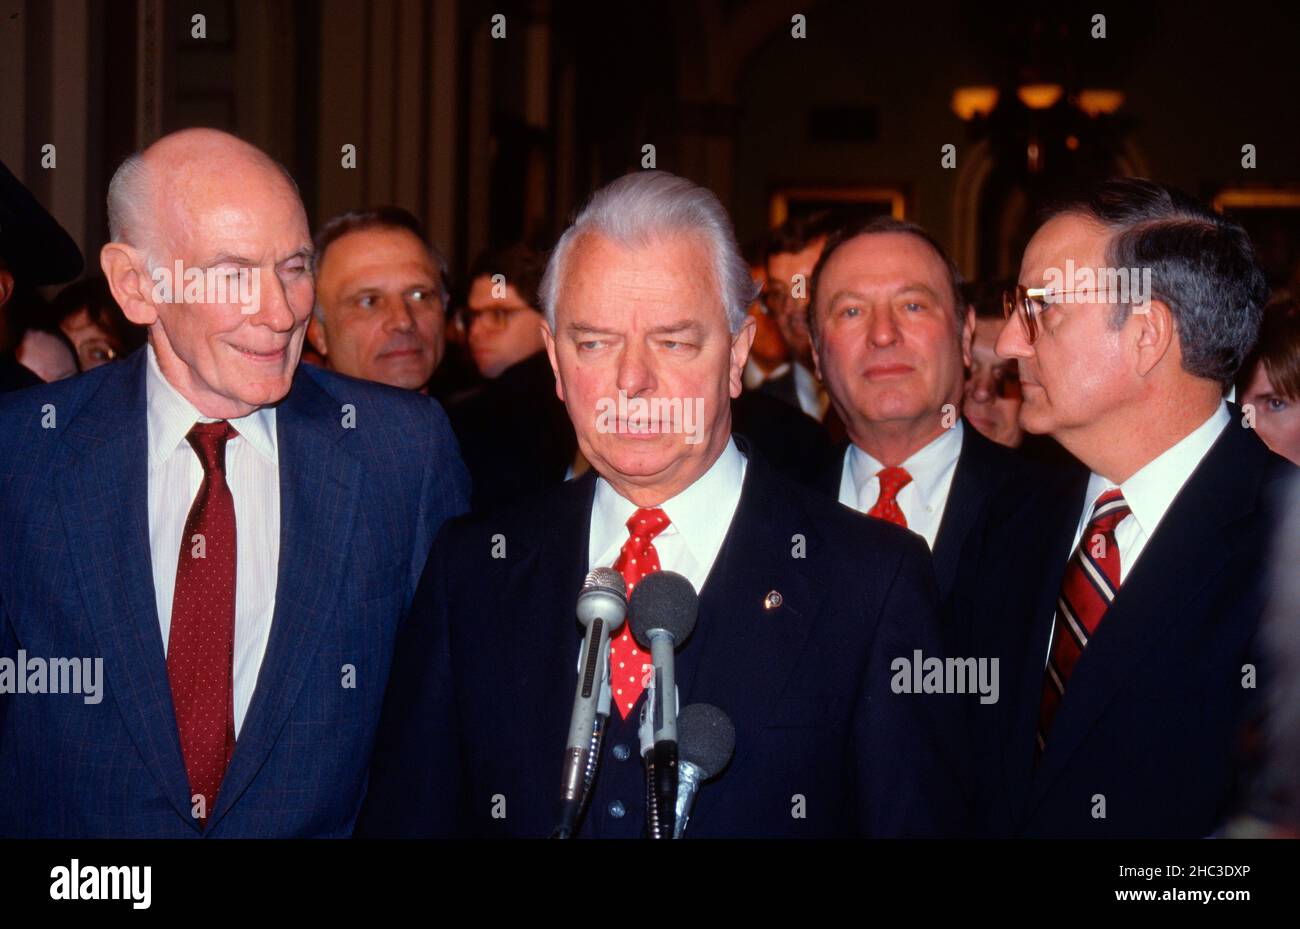 United States Senate Majority Leader Robert Byrd (Democrat of West Virginia), center, speaks to reporters after the US Senate Democratic Caucus elected US Senator George Mitchell (Democrat of Maine), right, as Majority Leader for the 101st Congress in the US Capitol in Washington, DC on November 29, 1988. Also photographed are US Senator Alan Cranston (Democrat of California), left; US Senator David Pryor (Democrat of Arkansas), Secretary of the Senate Democratic Conference, left center; and US Senator Alan J Dixon (Democrat of Illinois), second right. Credit: Arnie Sachs/CNP Stock Photo